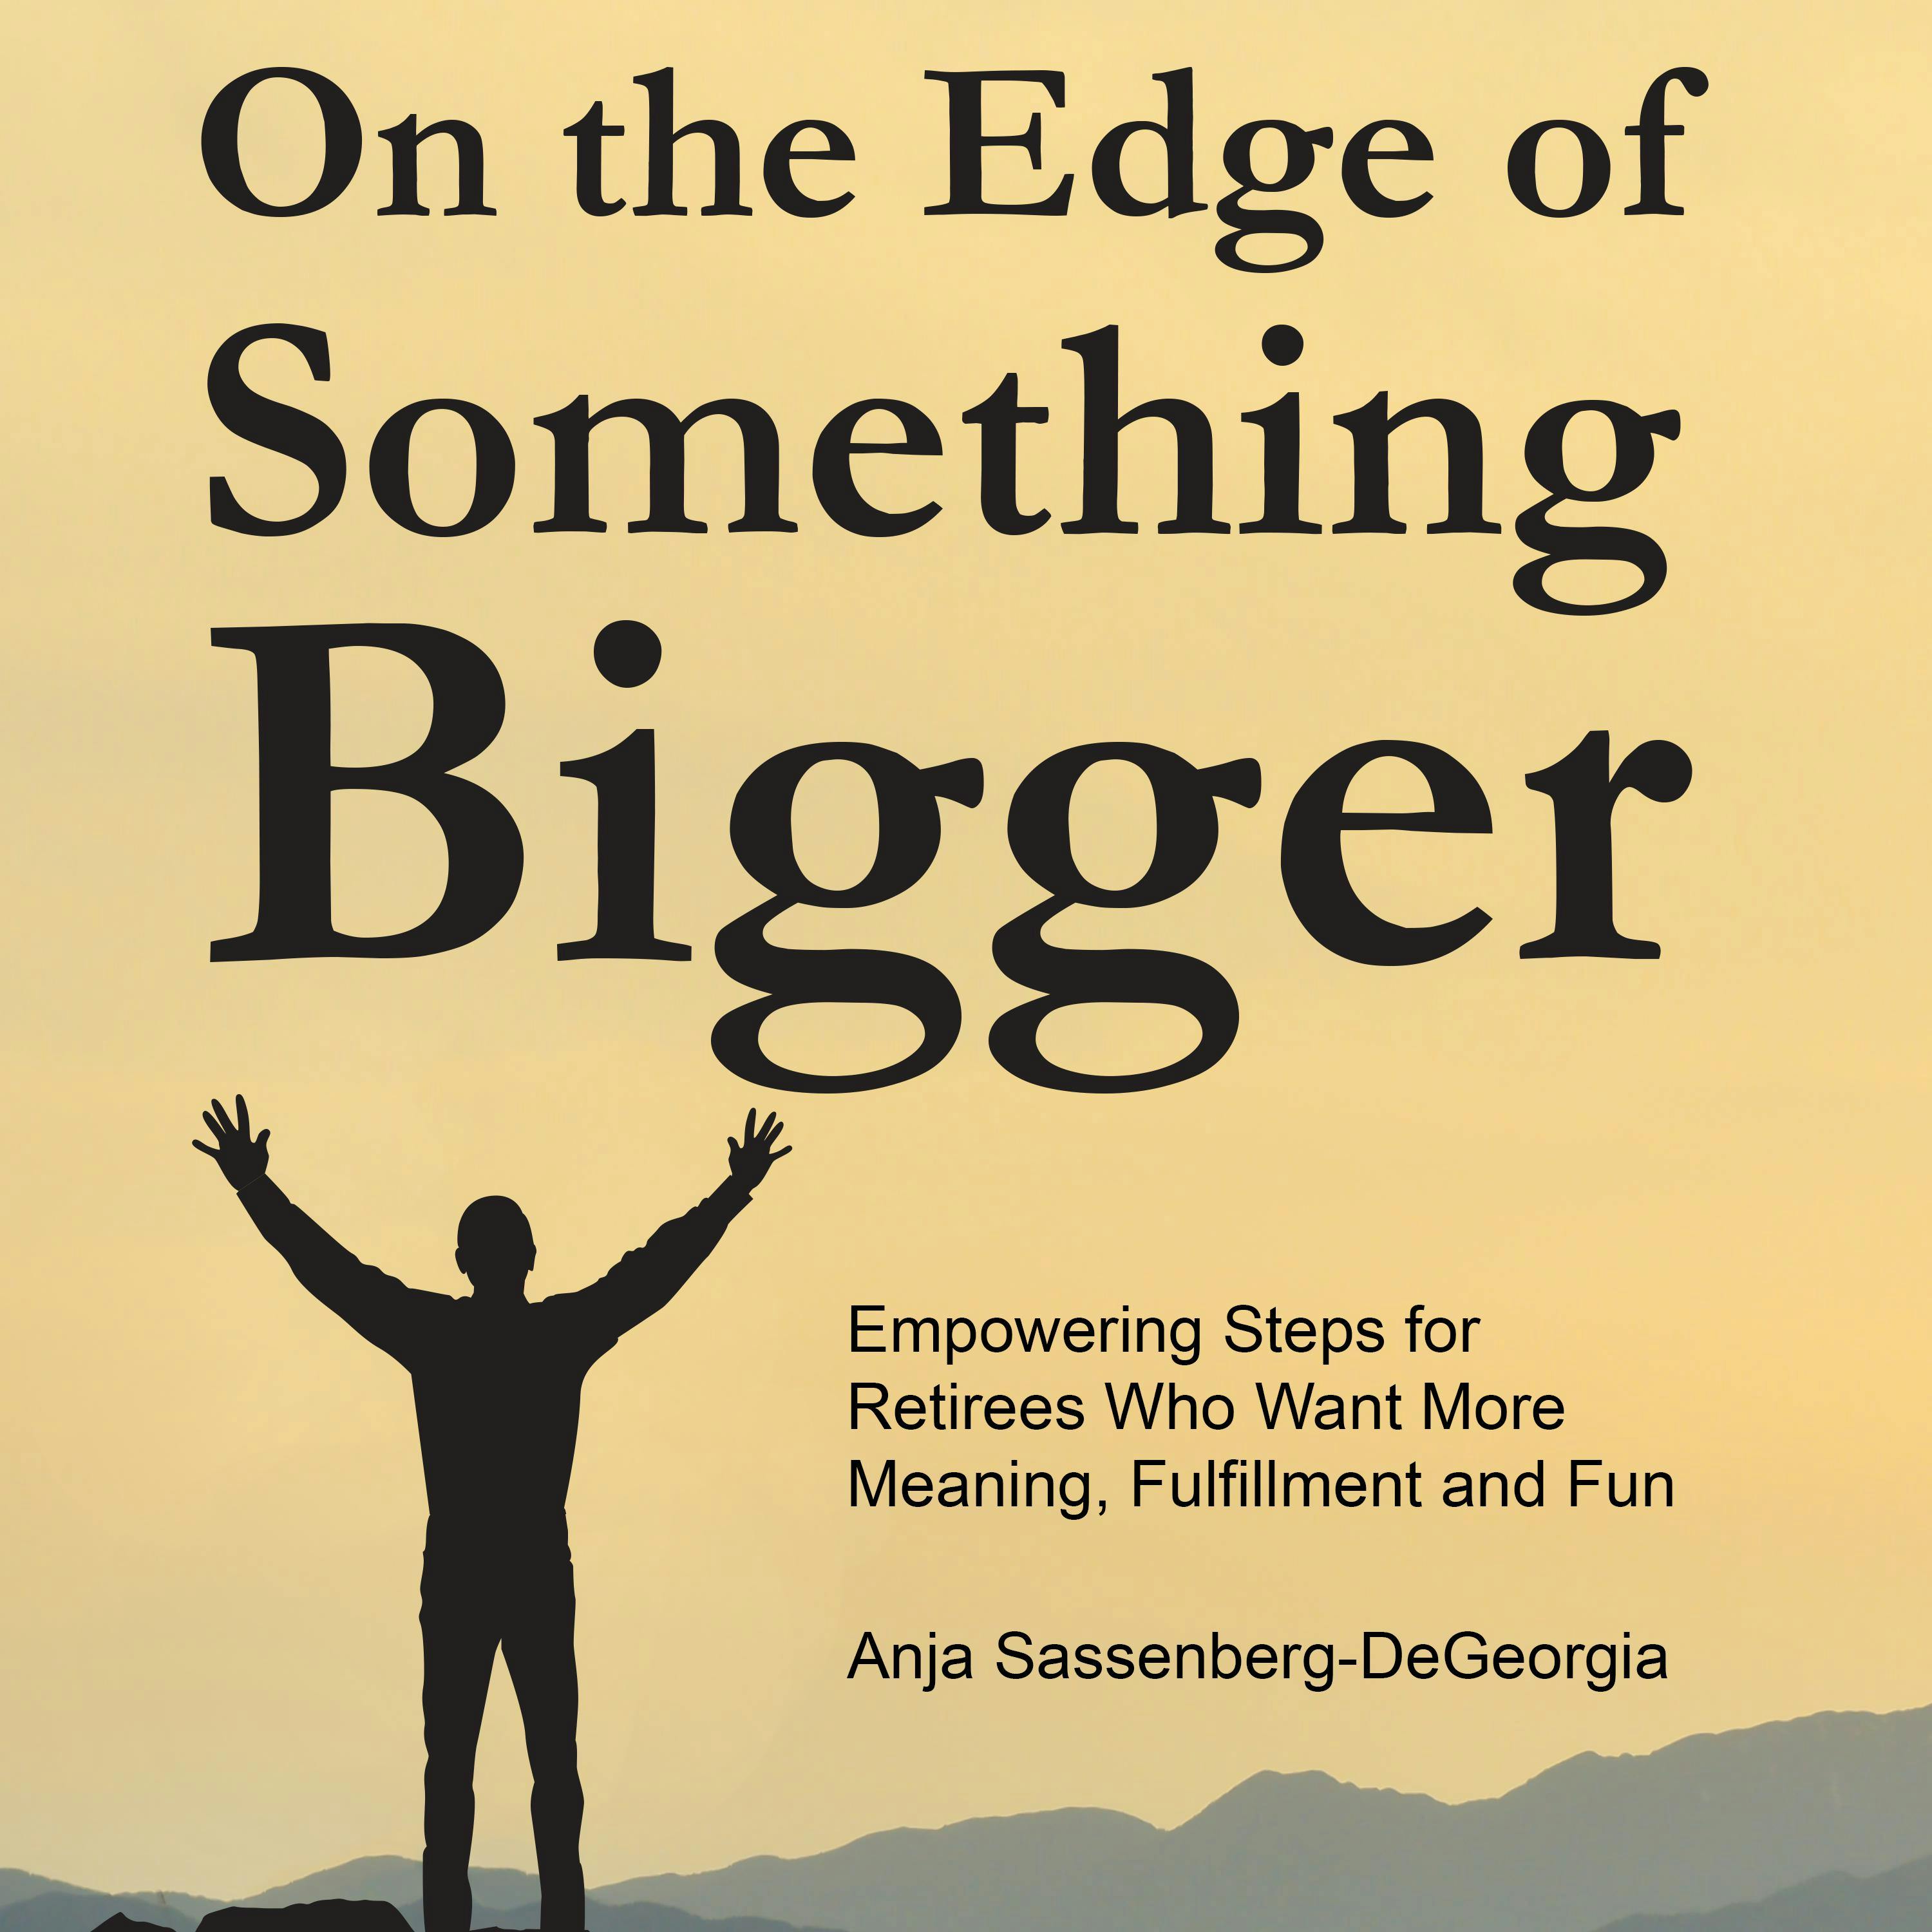 On the Edge of Something Bigger: Empowering Steps for Retirees Who Want More Meaning, Fulfillment and Fun - Anja Sassenberg-DeGeorgia